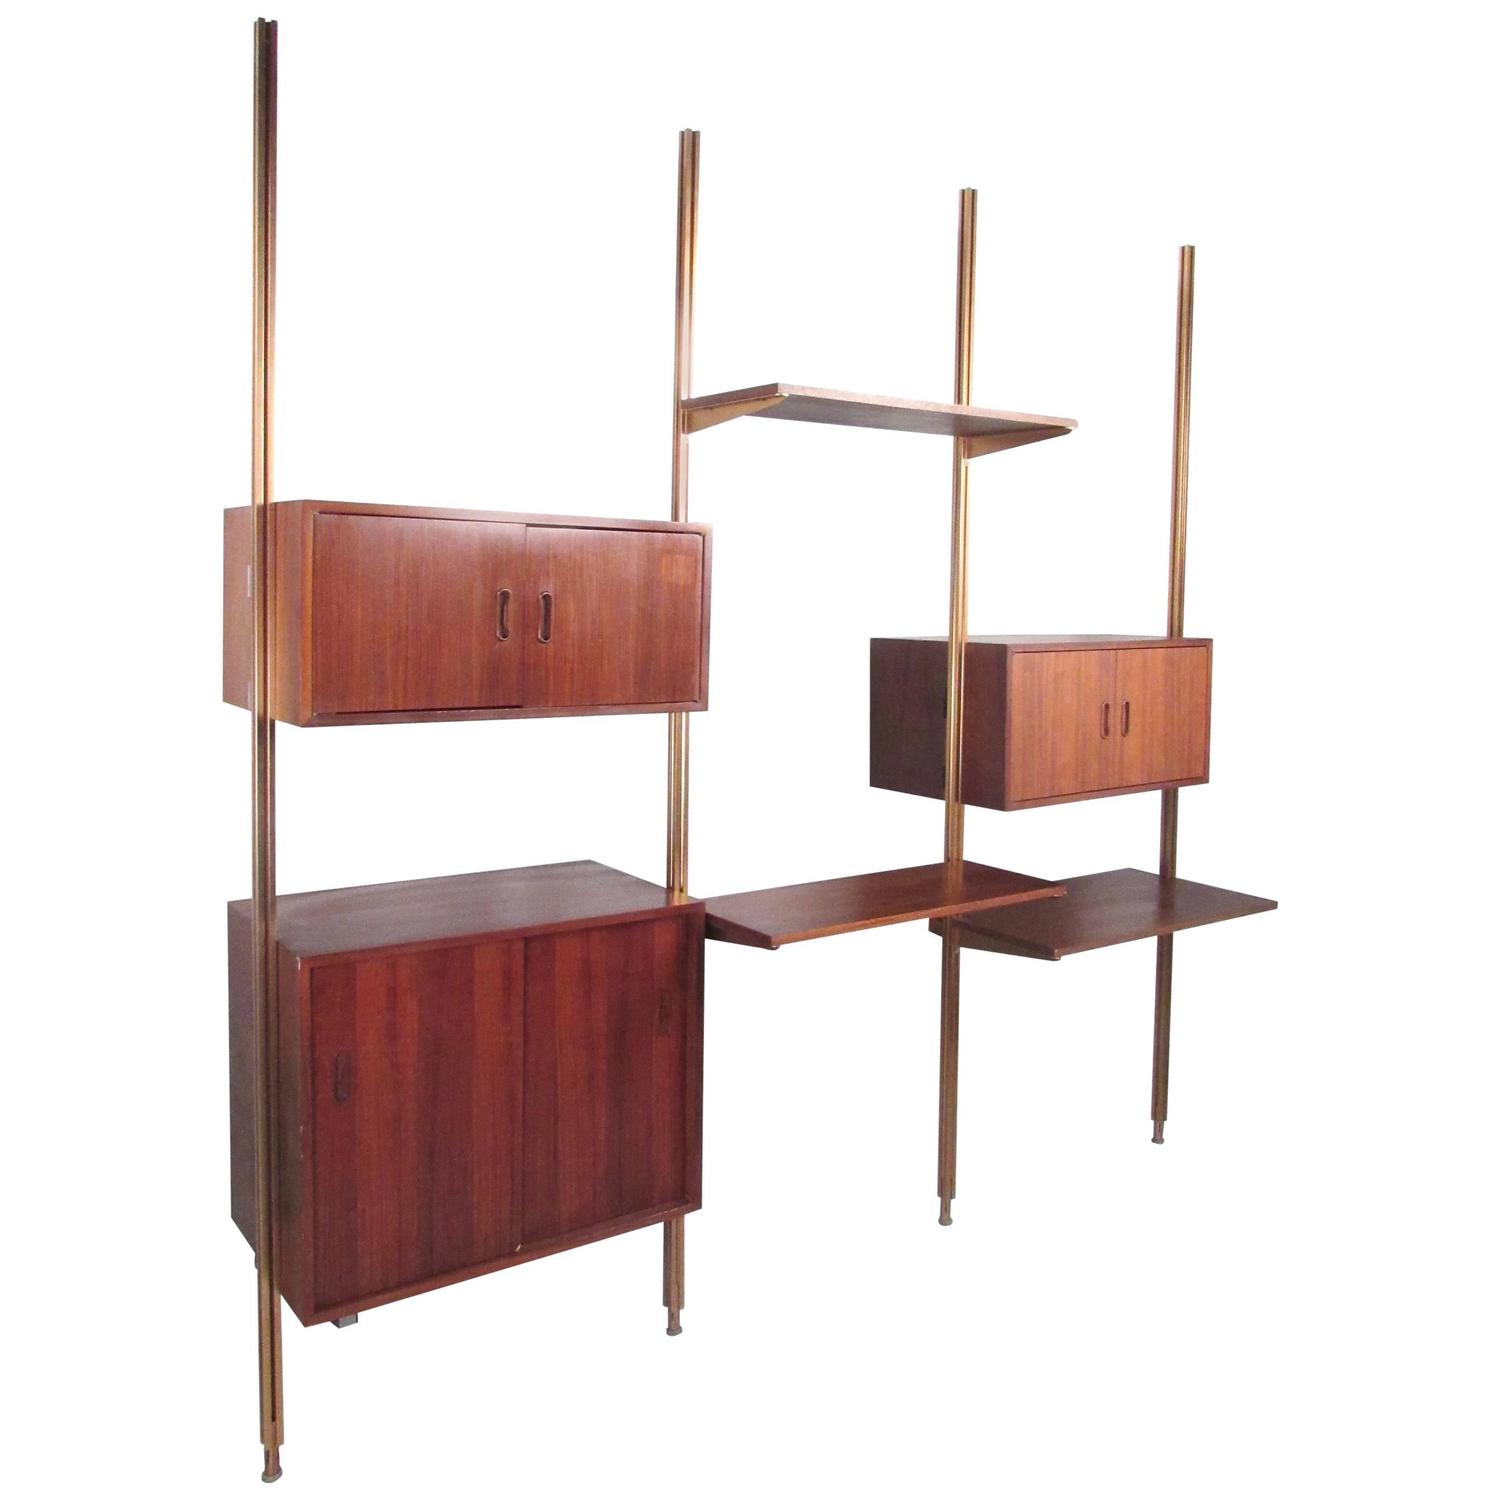 MidCentury Modern Teak Omnia Modular Wall Unit by George Nelson For Sale at 1stdibs